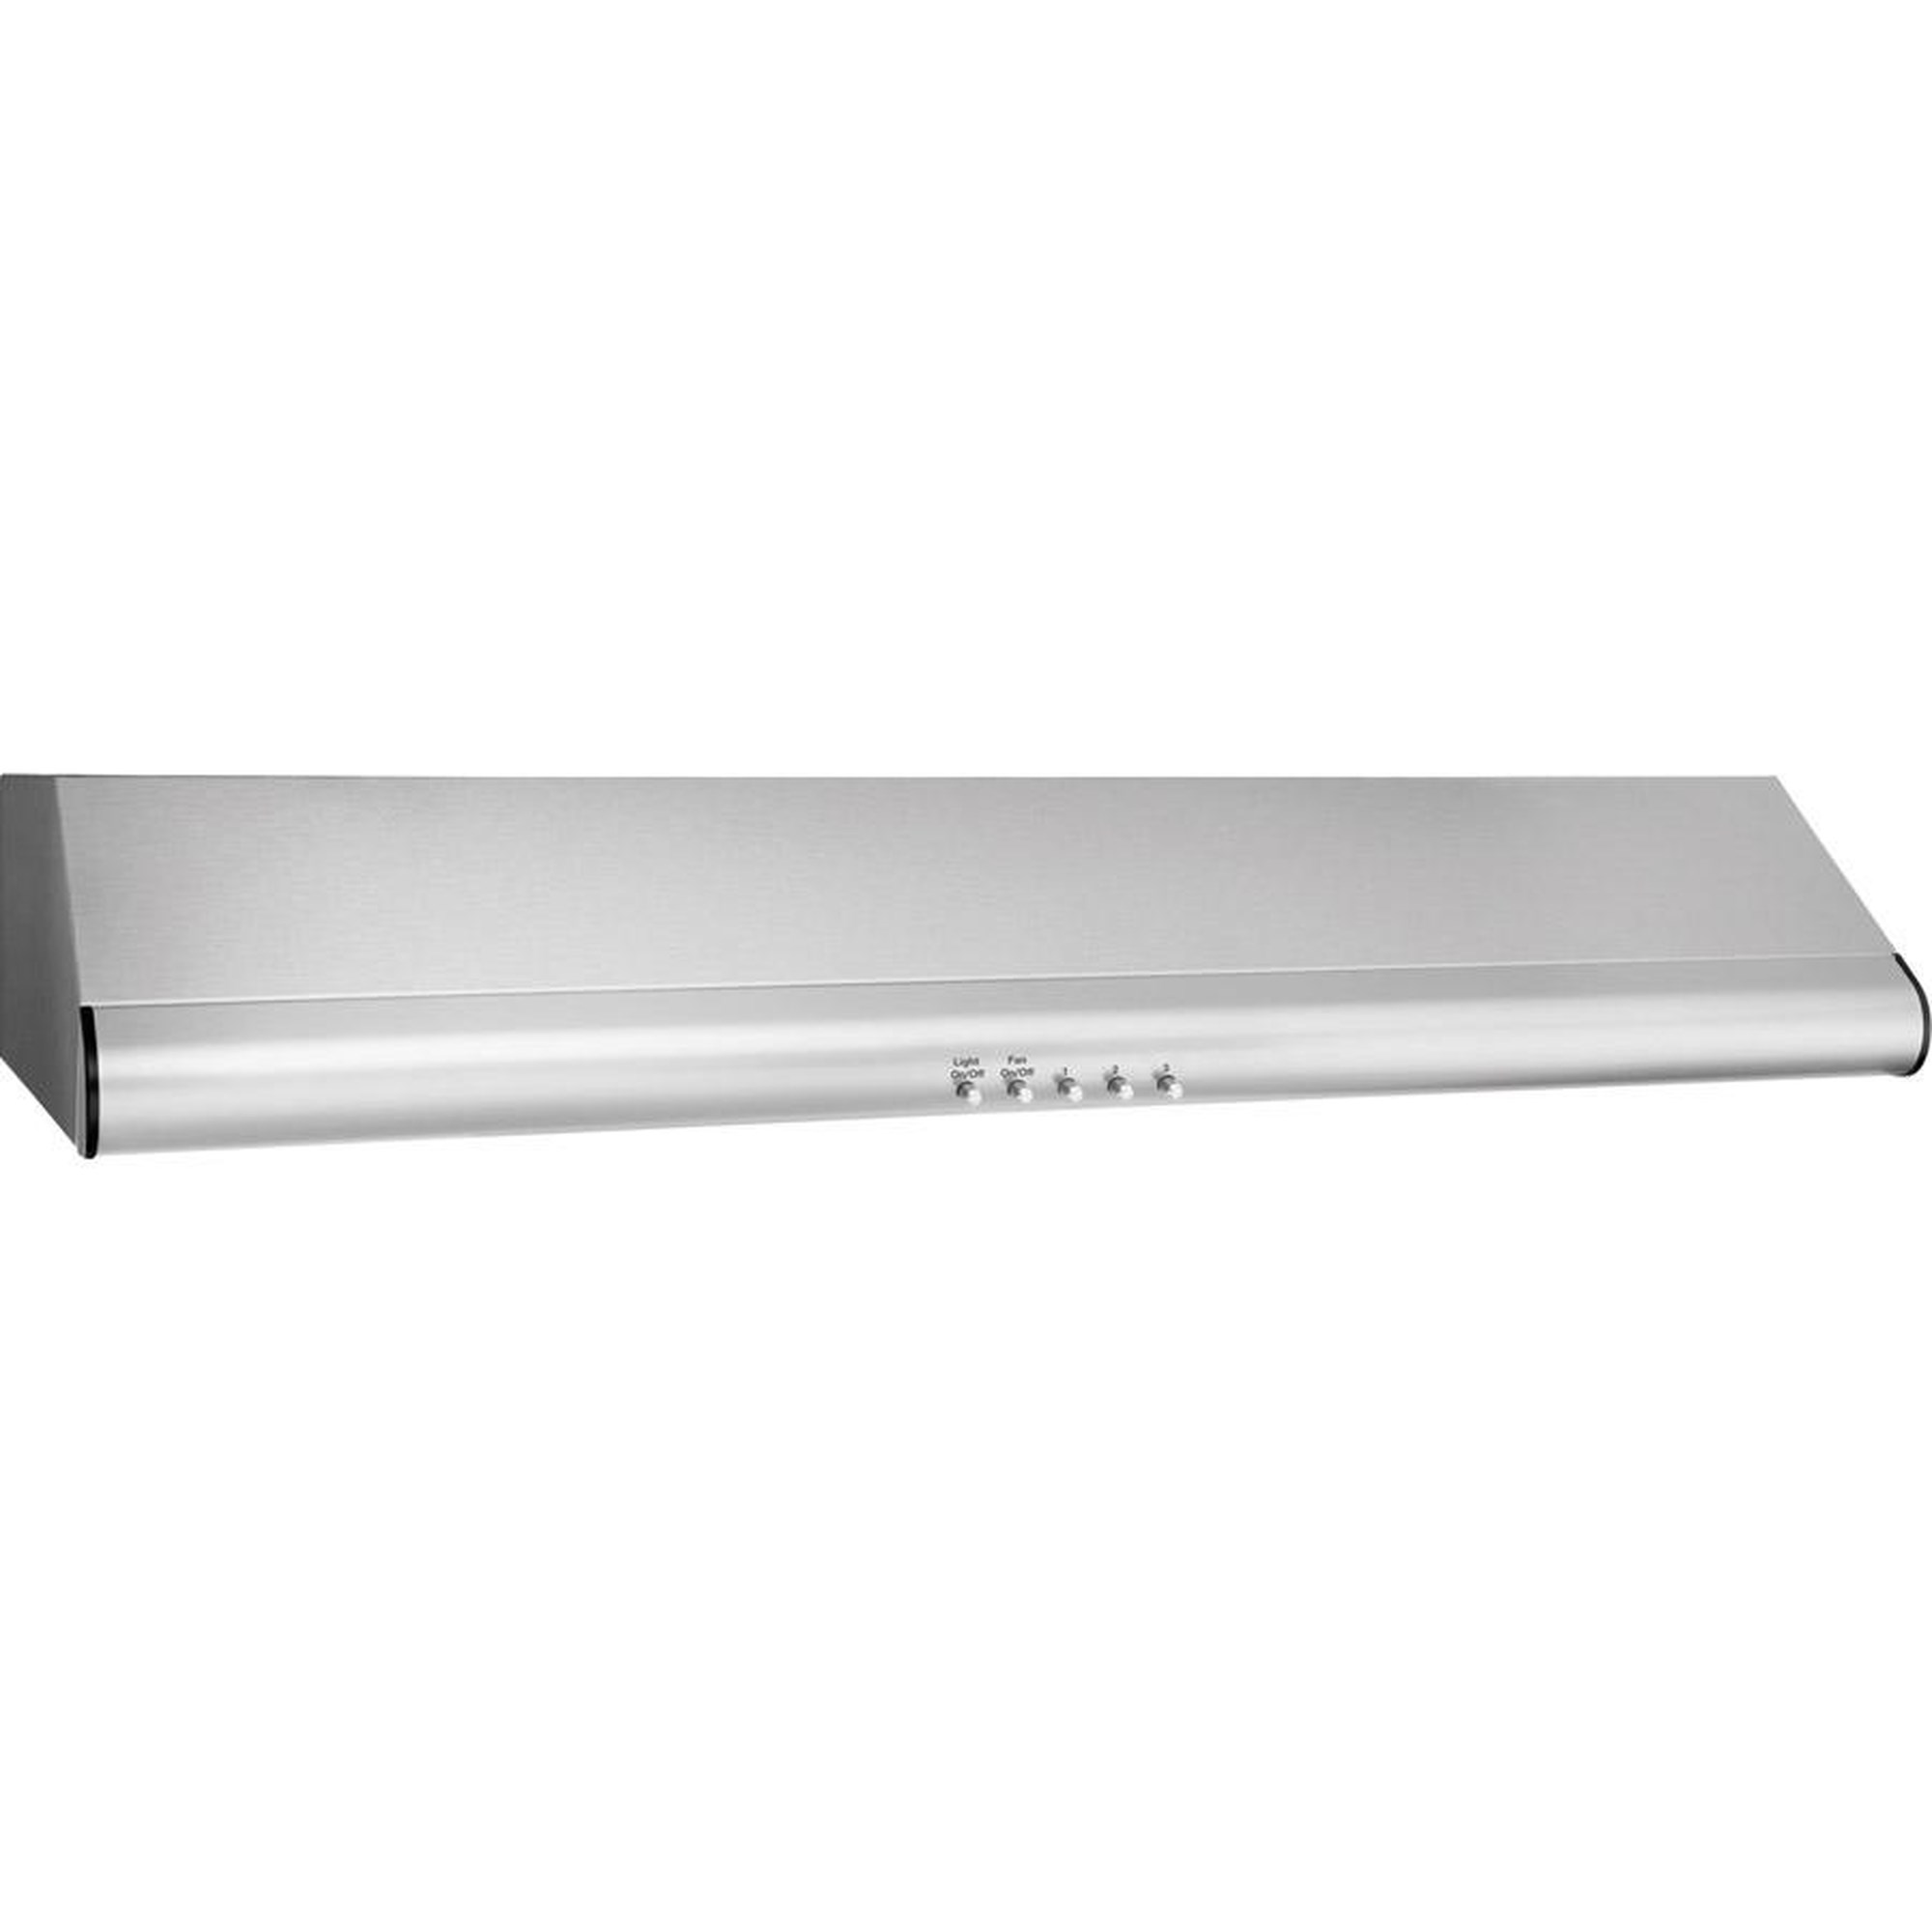 Frigidaire FHWC3055LS 30 Stainless Steel Ducted Wall Hood